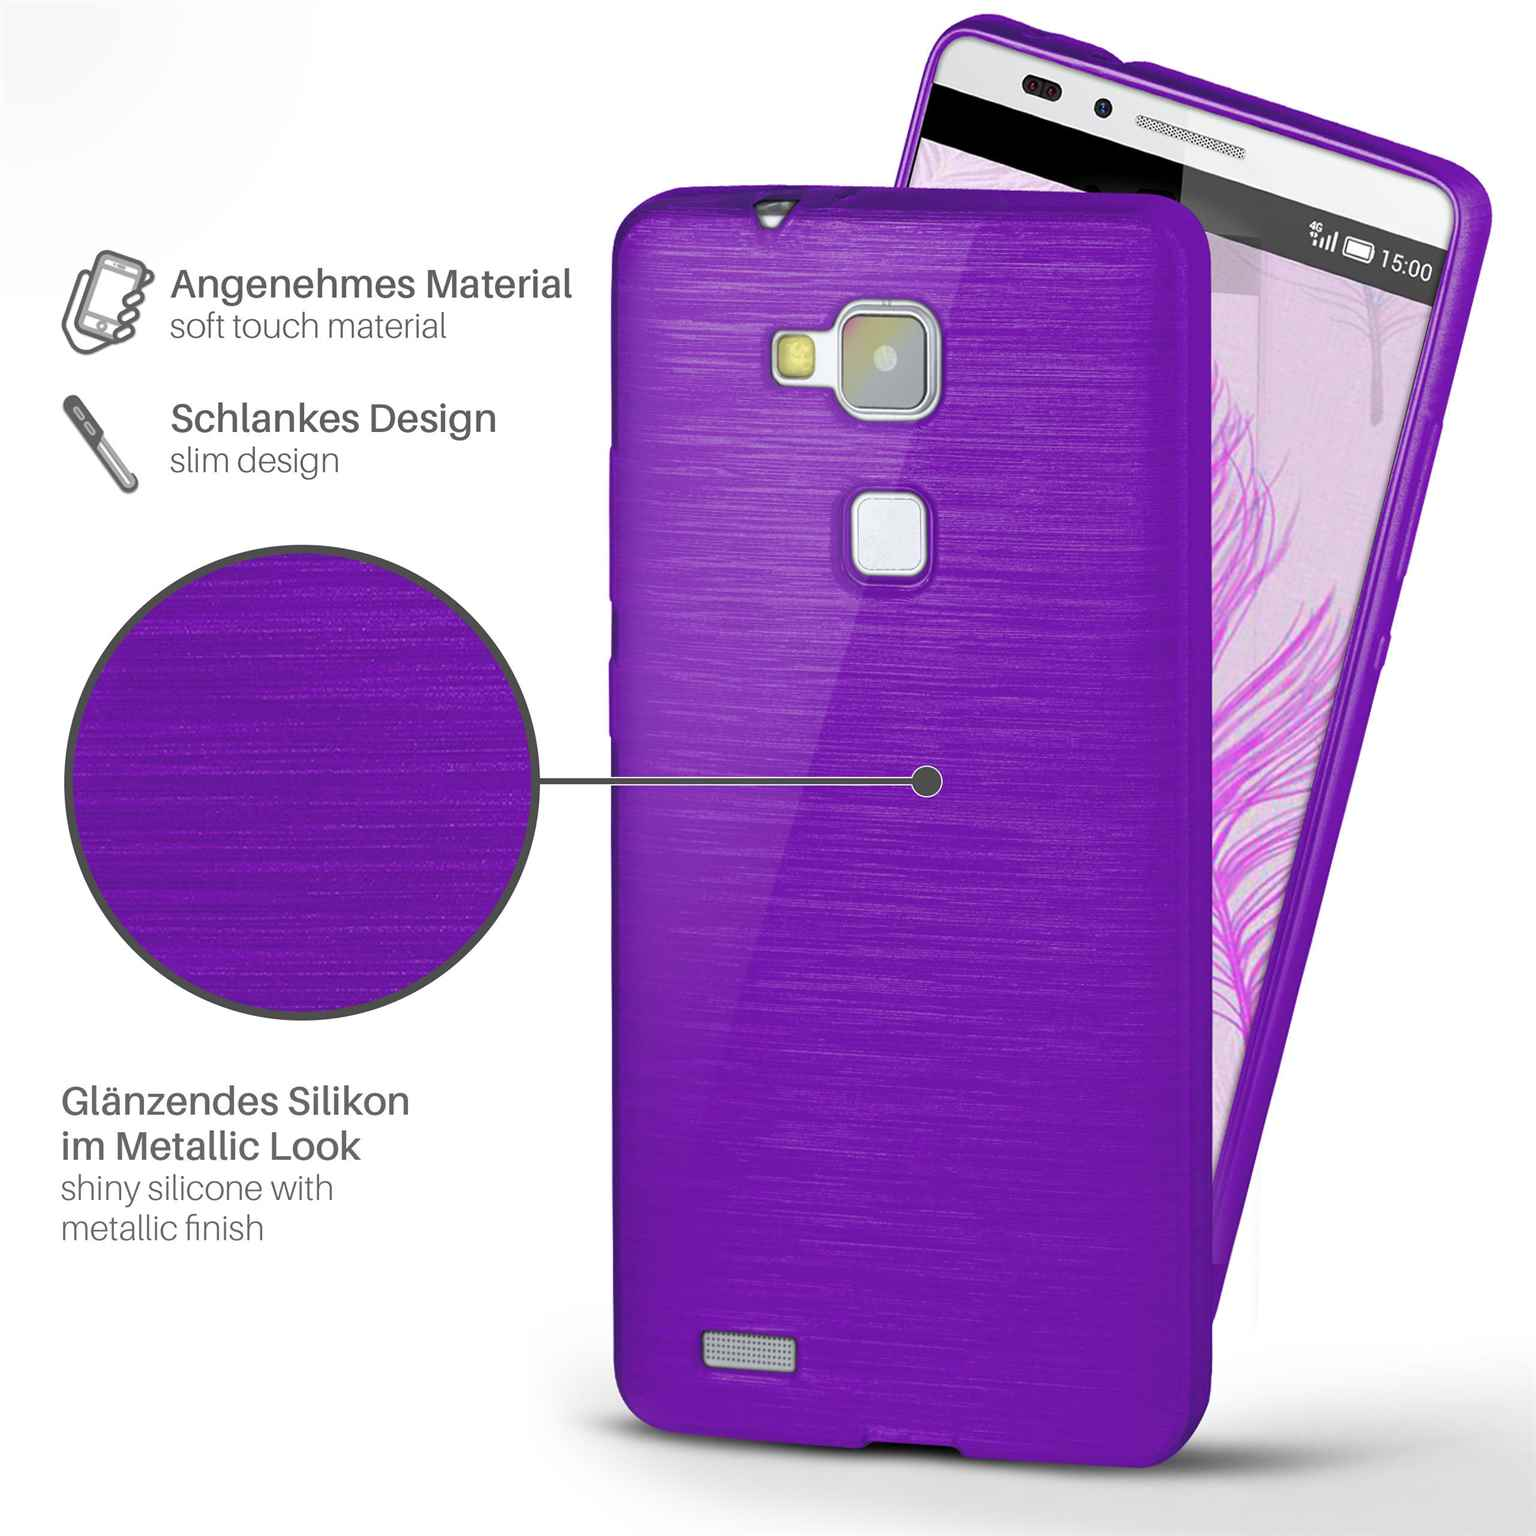 MOEX Brushed Huawei, Purpure-Purple Backcover, Case, Ascend 7, Mate